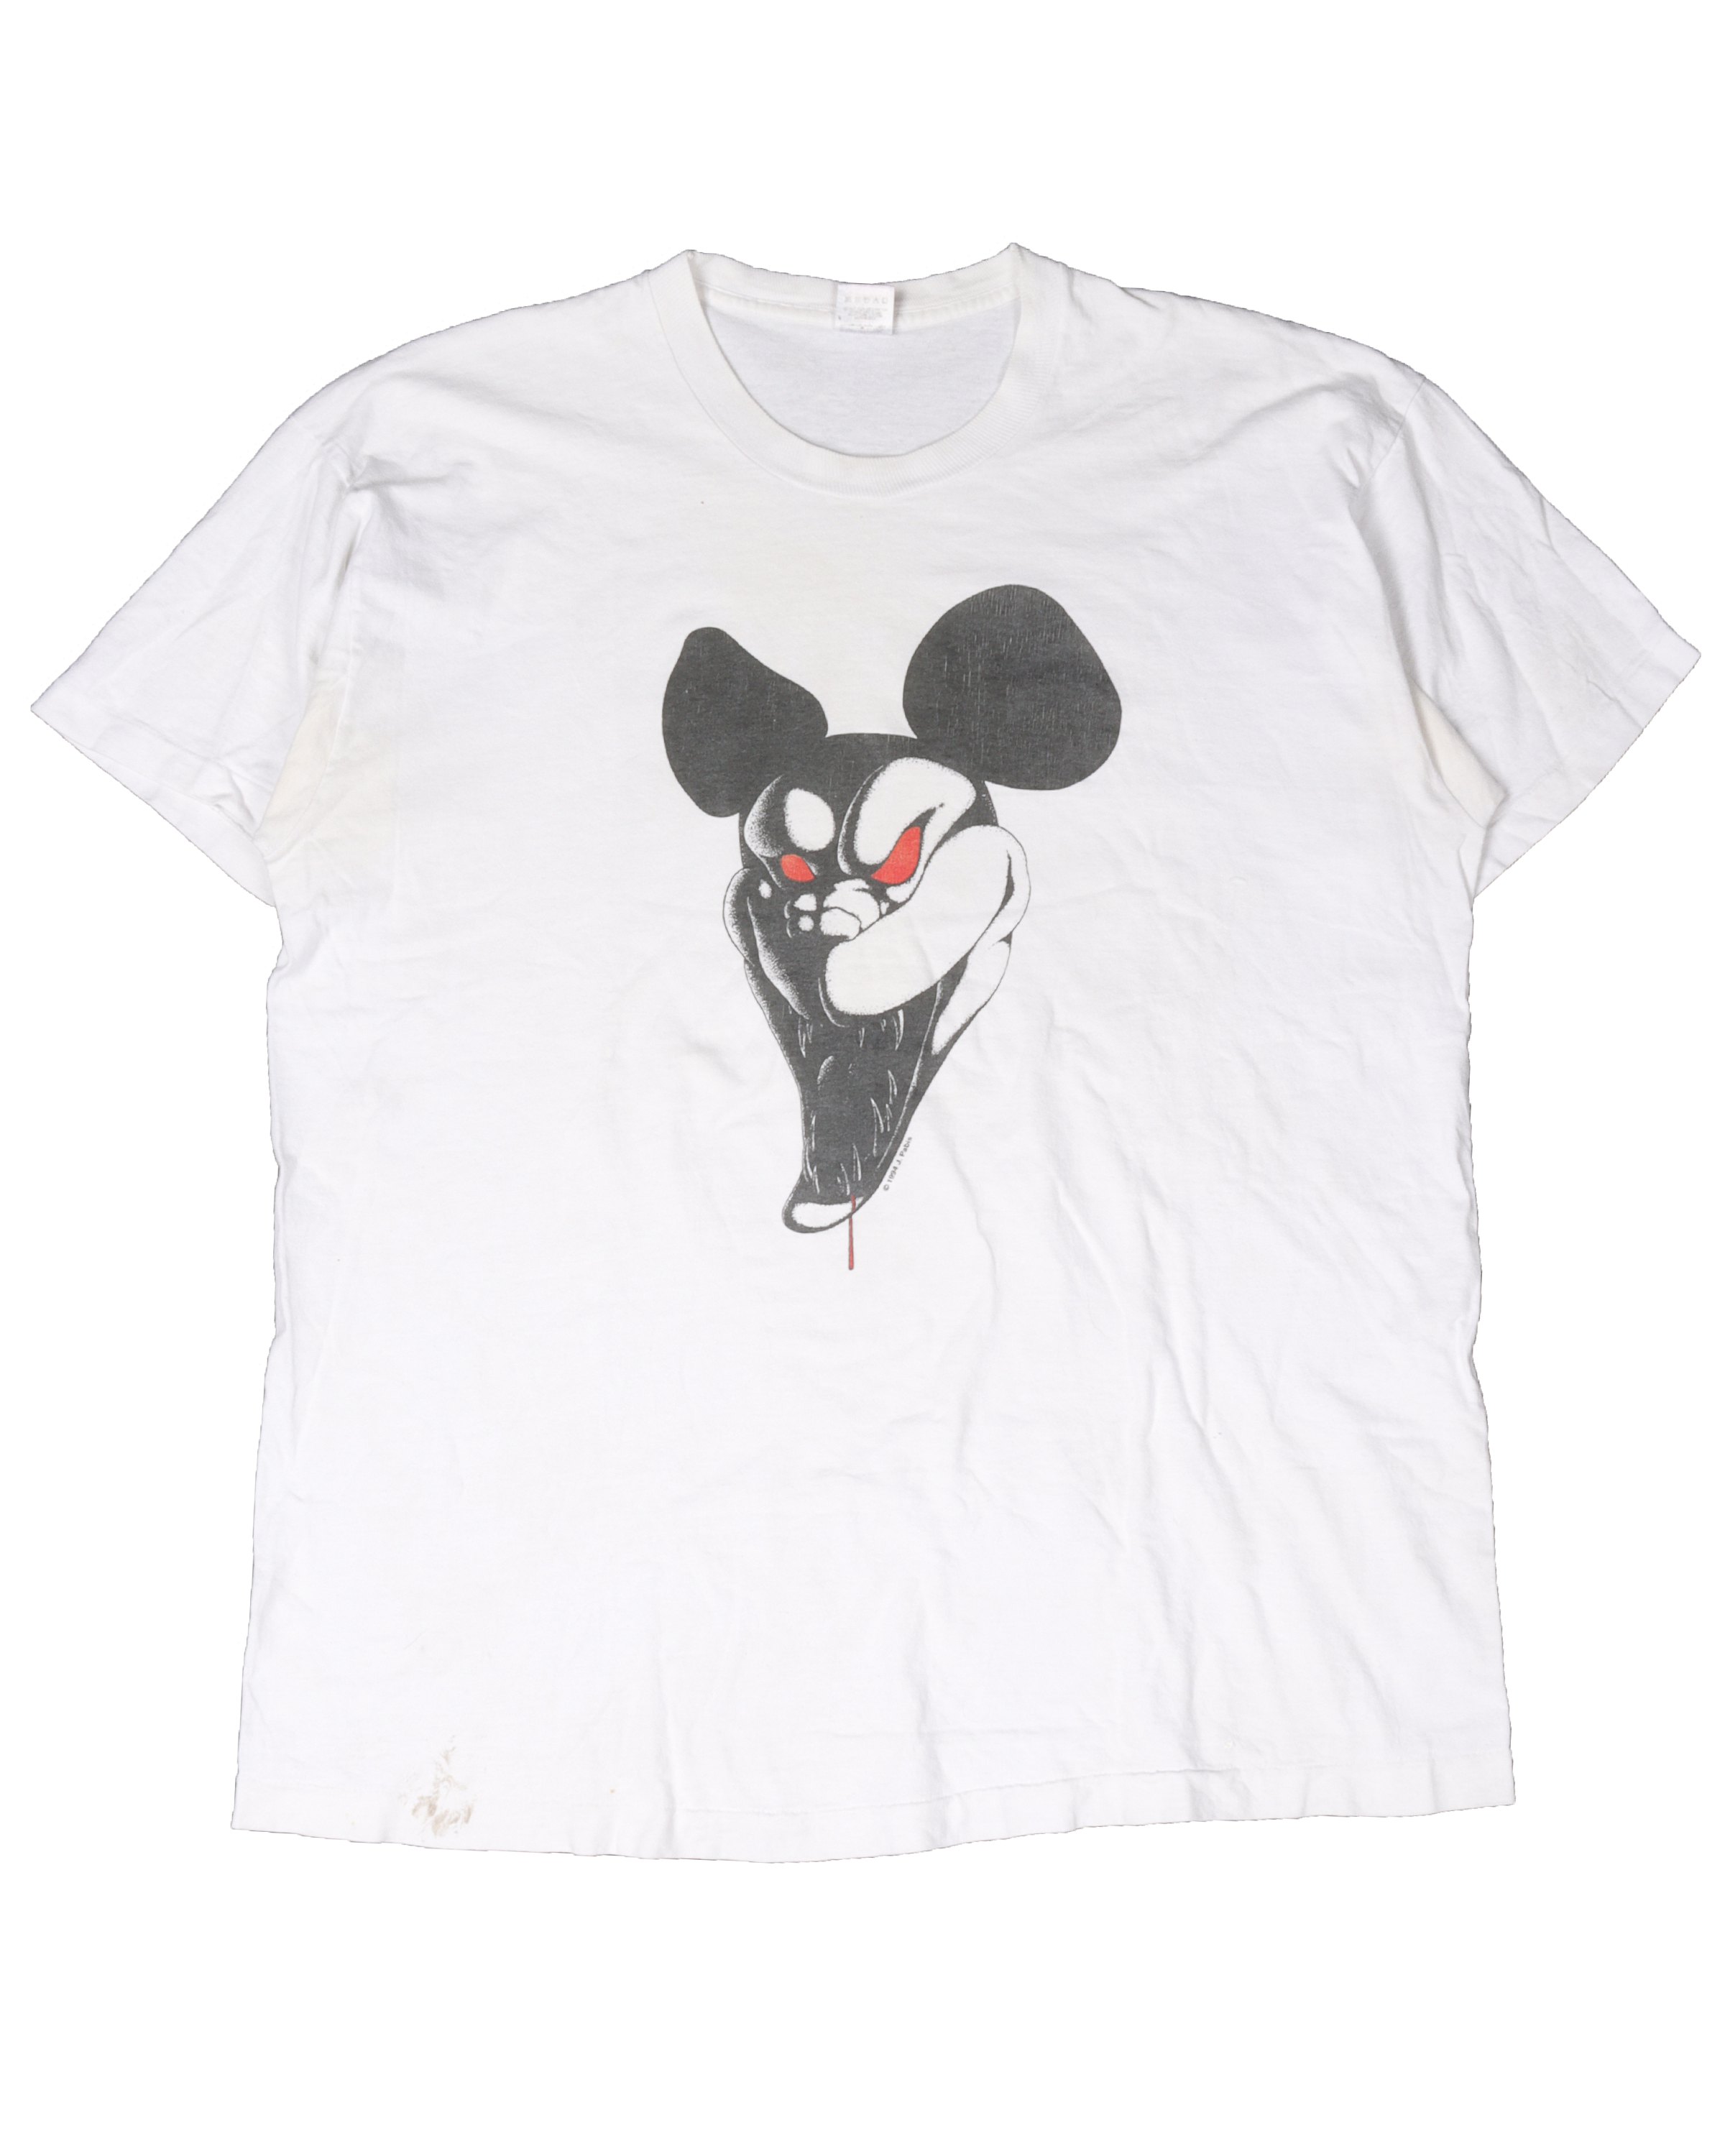 Scary Mickey Mouse T-Shirt